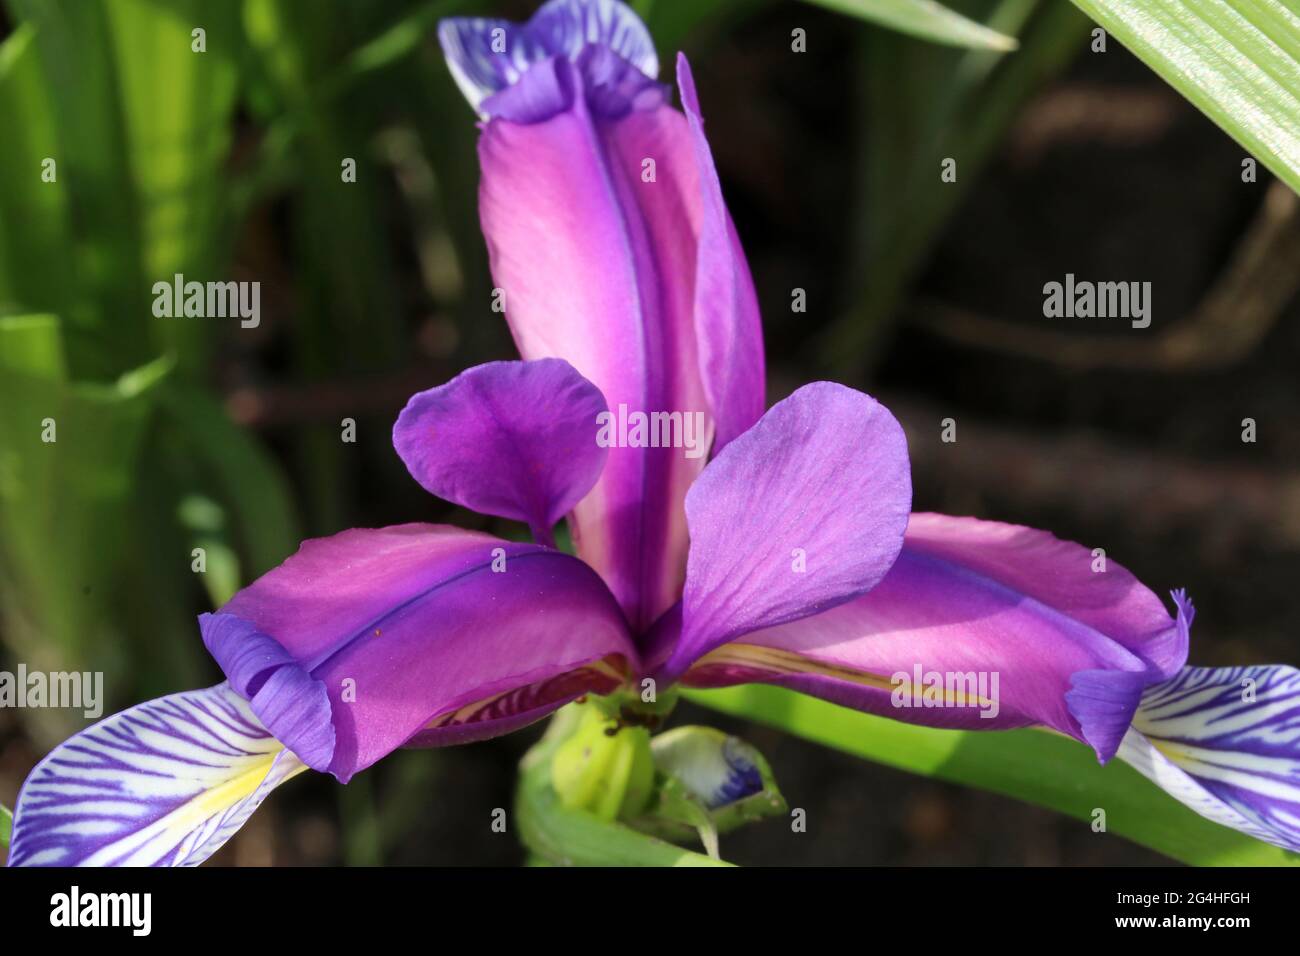 Iris graminea on blurred background.  Blue and violet flowers, almost hidden by narrow, grassy leaves, and a plum scented fragrance. Stock Photo